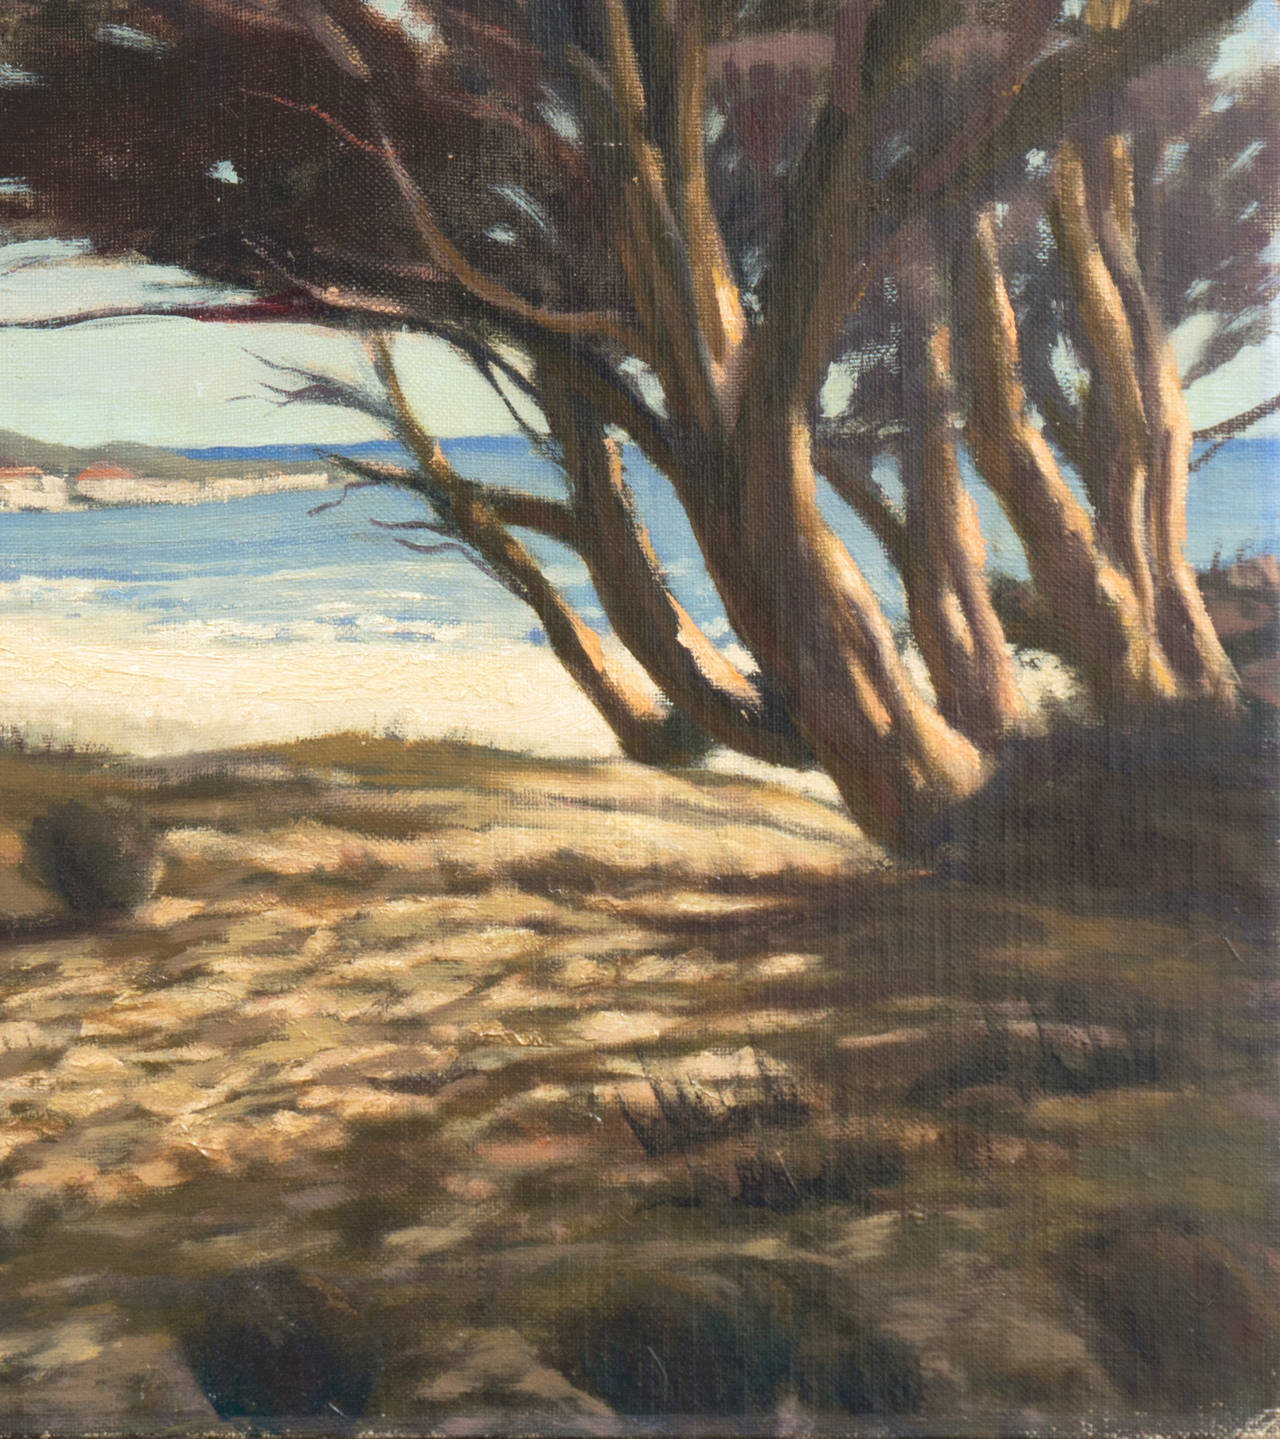 'View of the Pacific at Carmel', American Impressionist, Plein Air, California 2